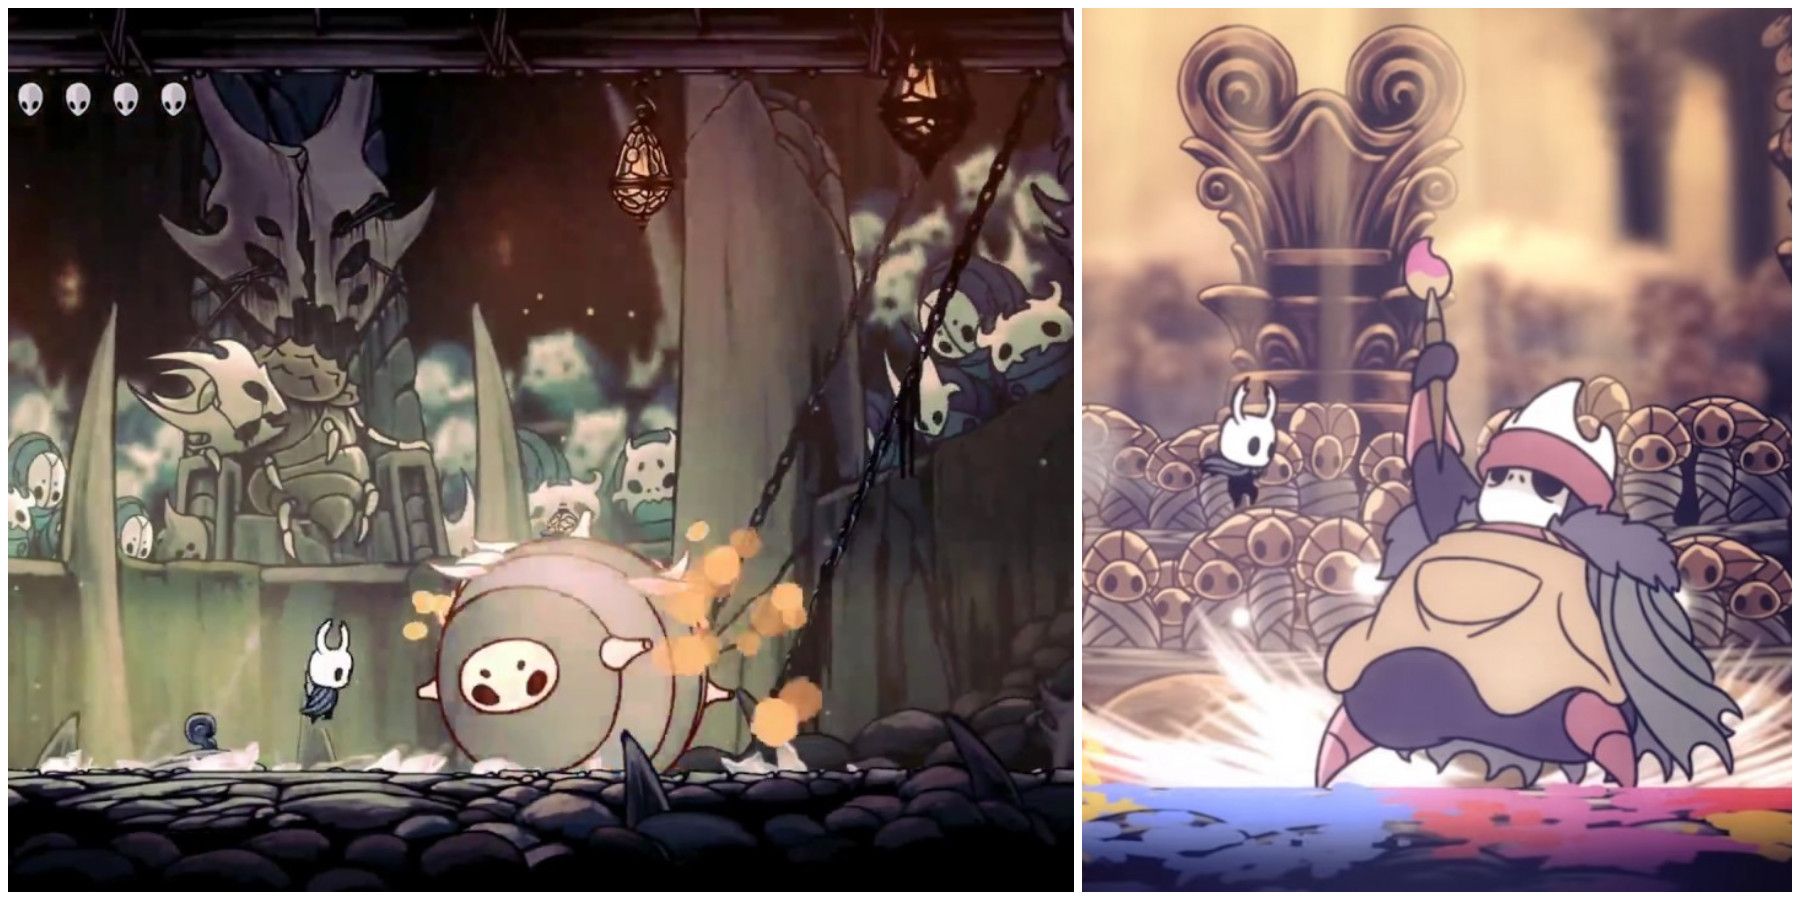 Colosseum of Fools in Hollow Knight